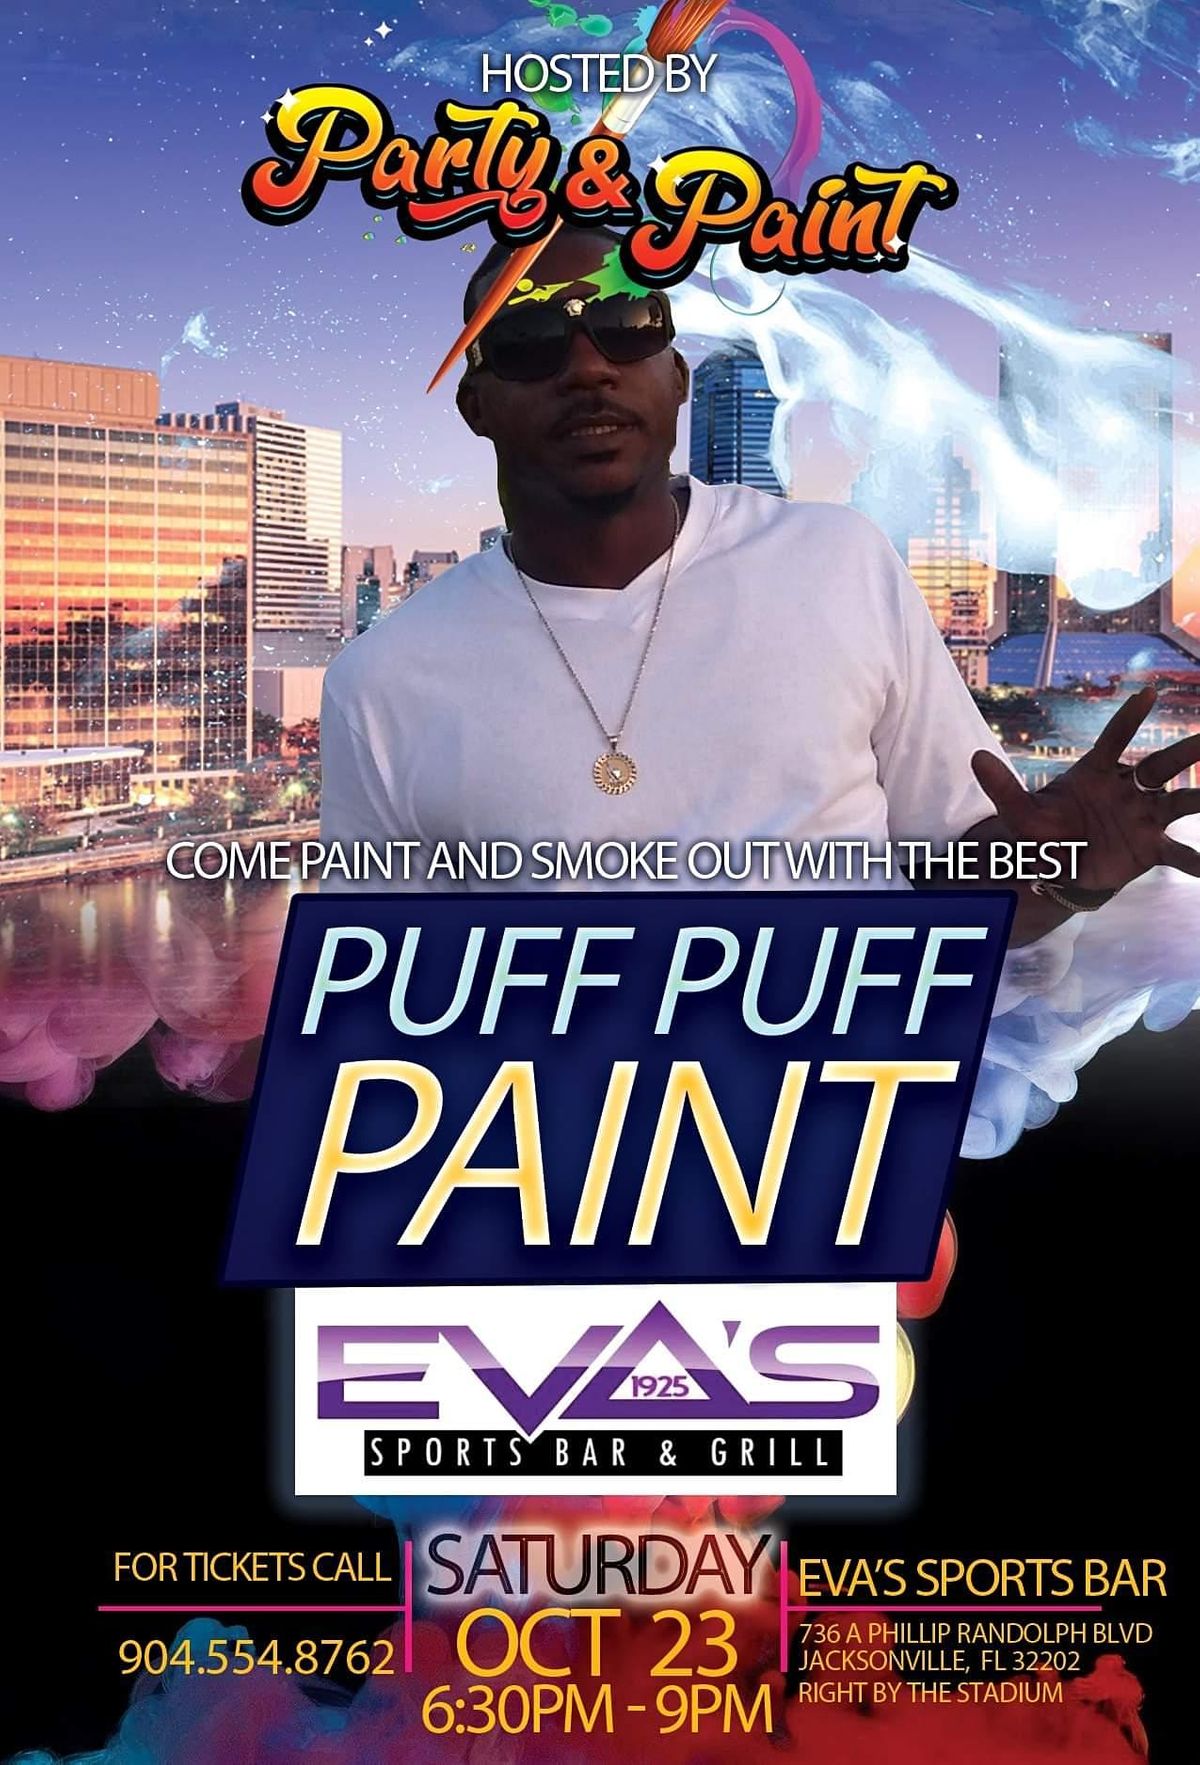 Puff Puff Paint "Hosted by Party & Paint"